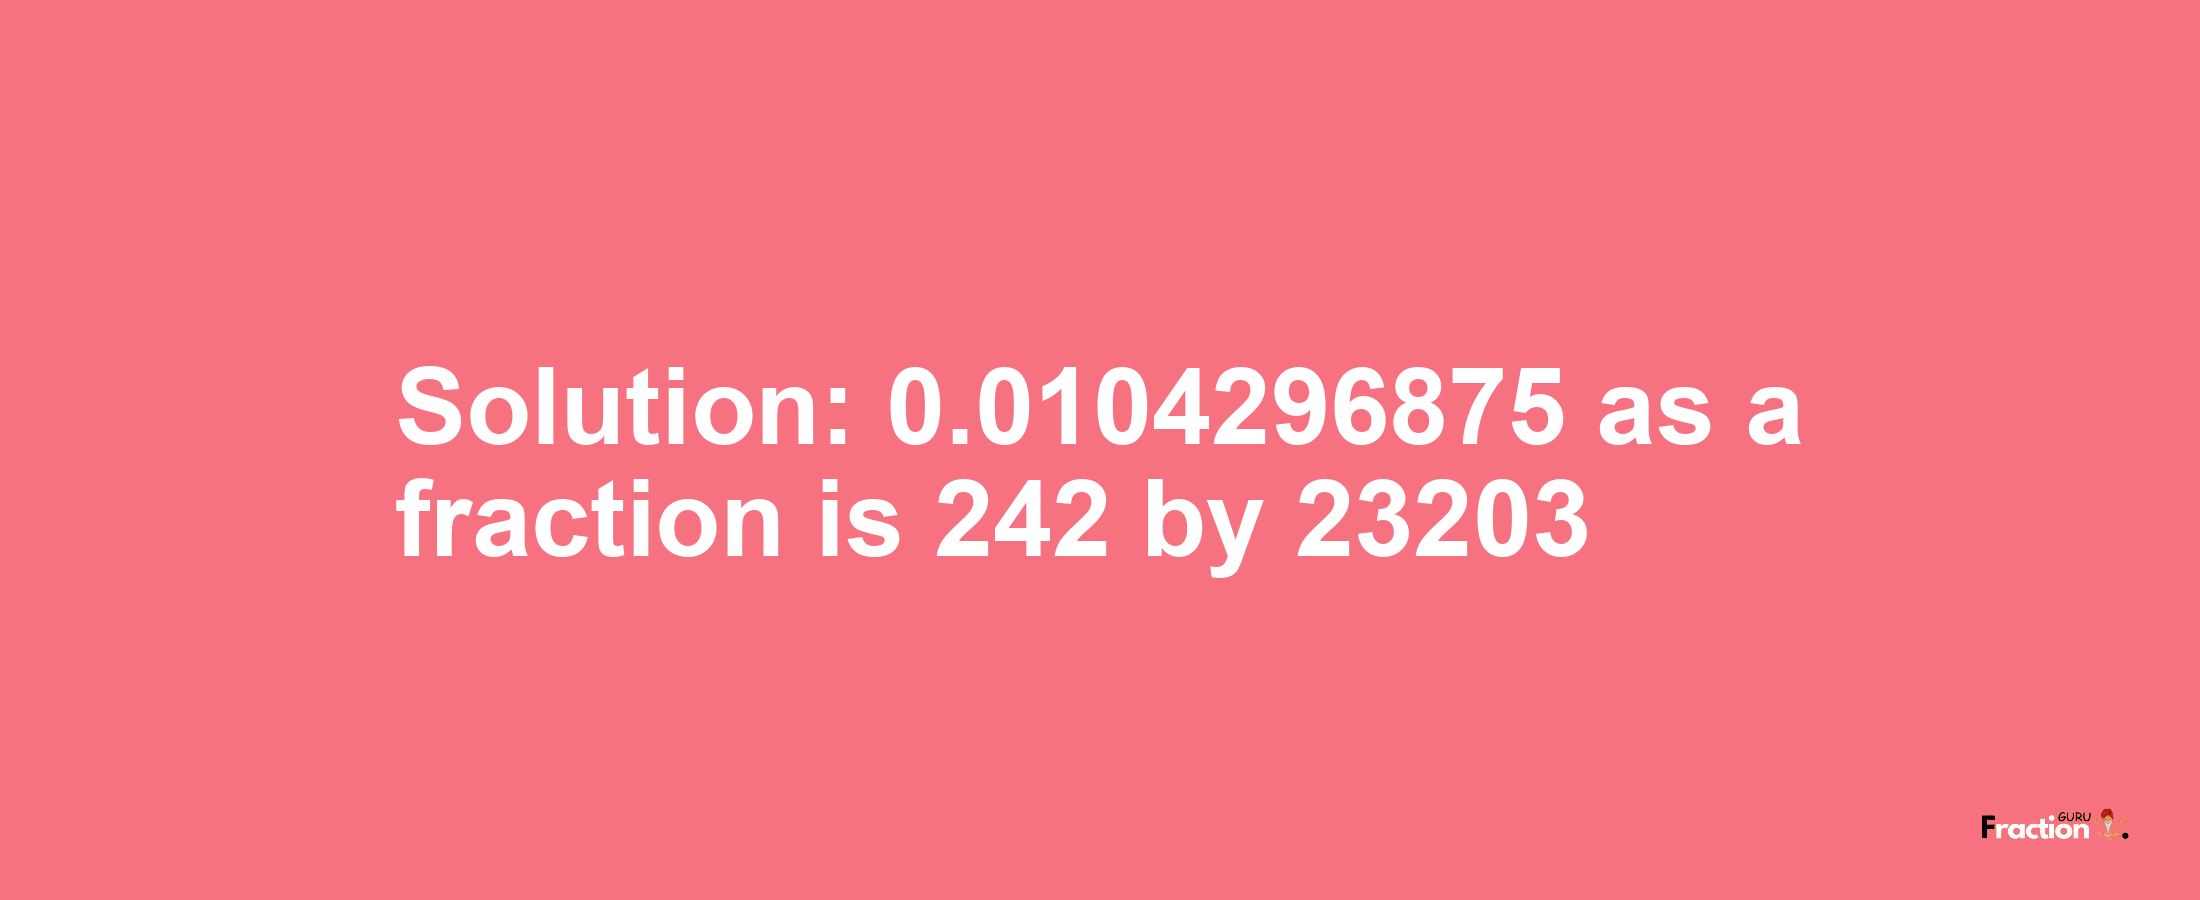 Solution:0.0104296875 as a fraction is 242/23203